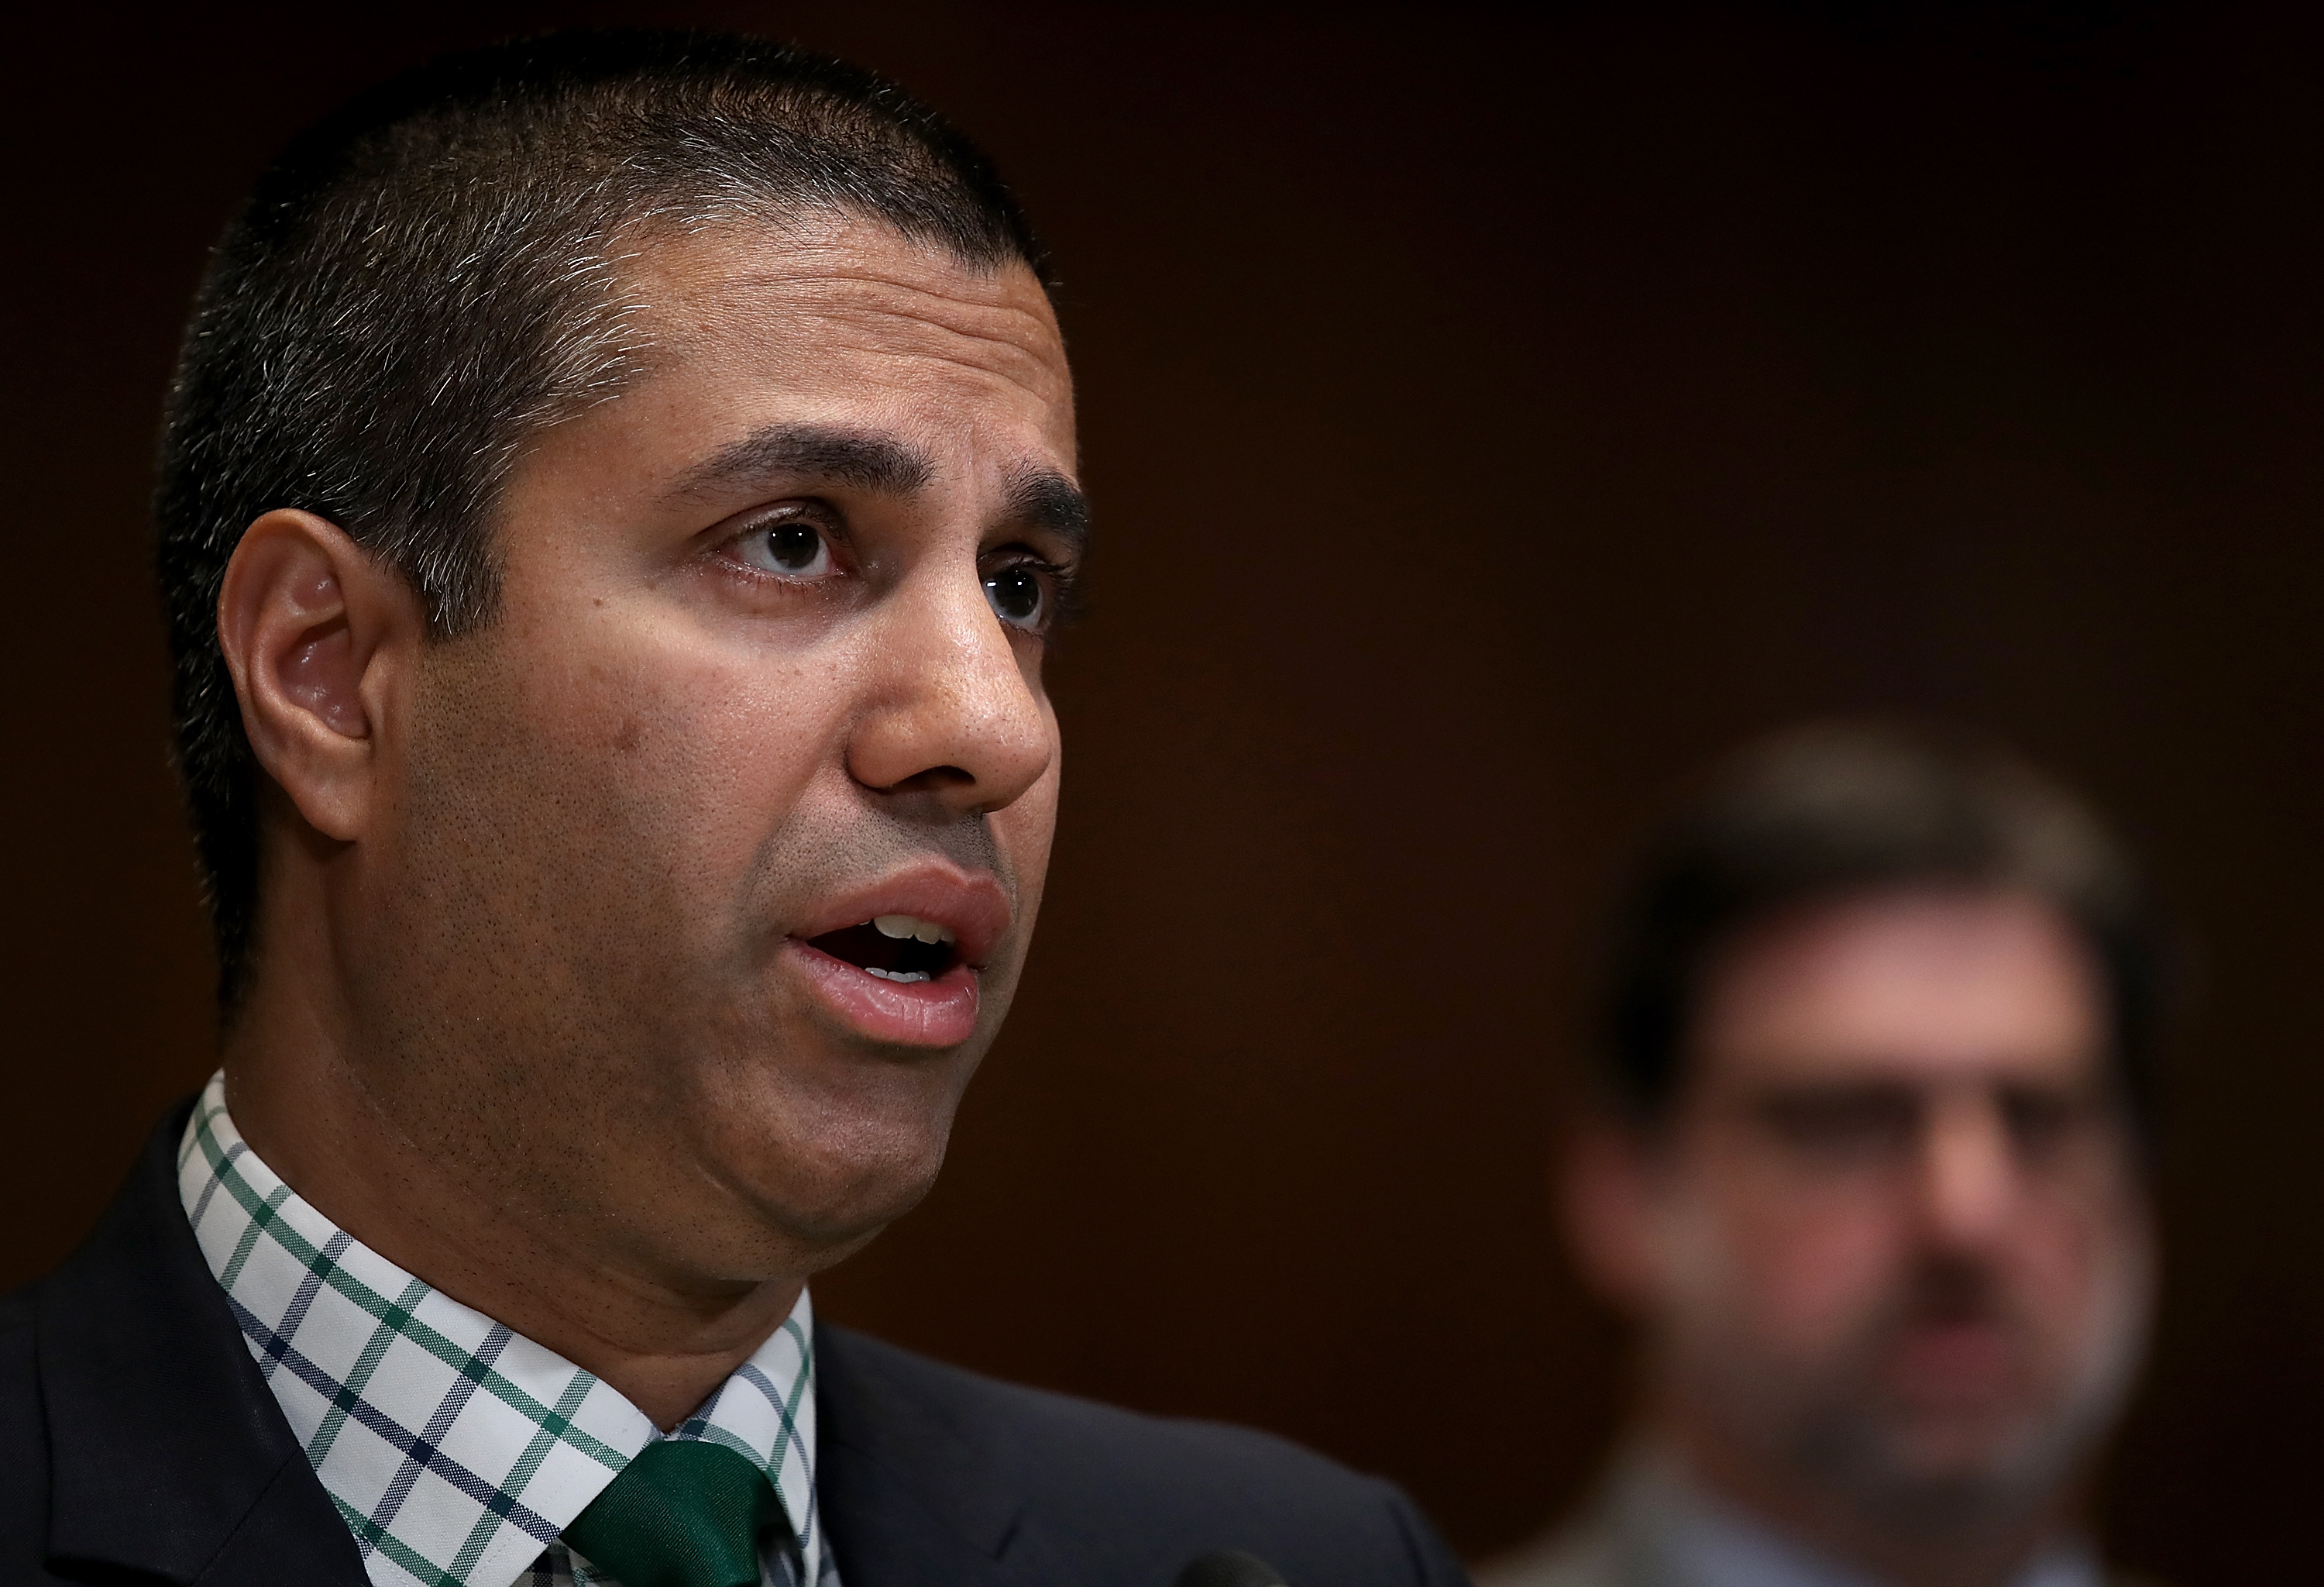 FCC Chairman Ajit Pai And FTC Chairman Joseph Simons Testify To Senate Appropriations Committee Hearing On Their Dept.'s Budget